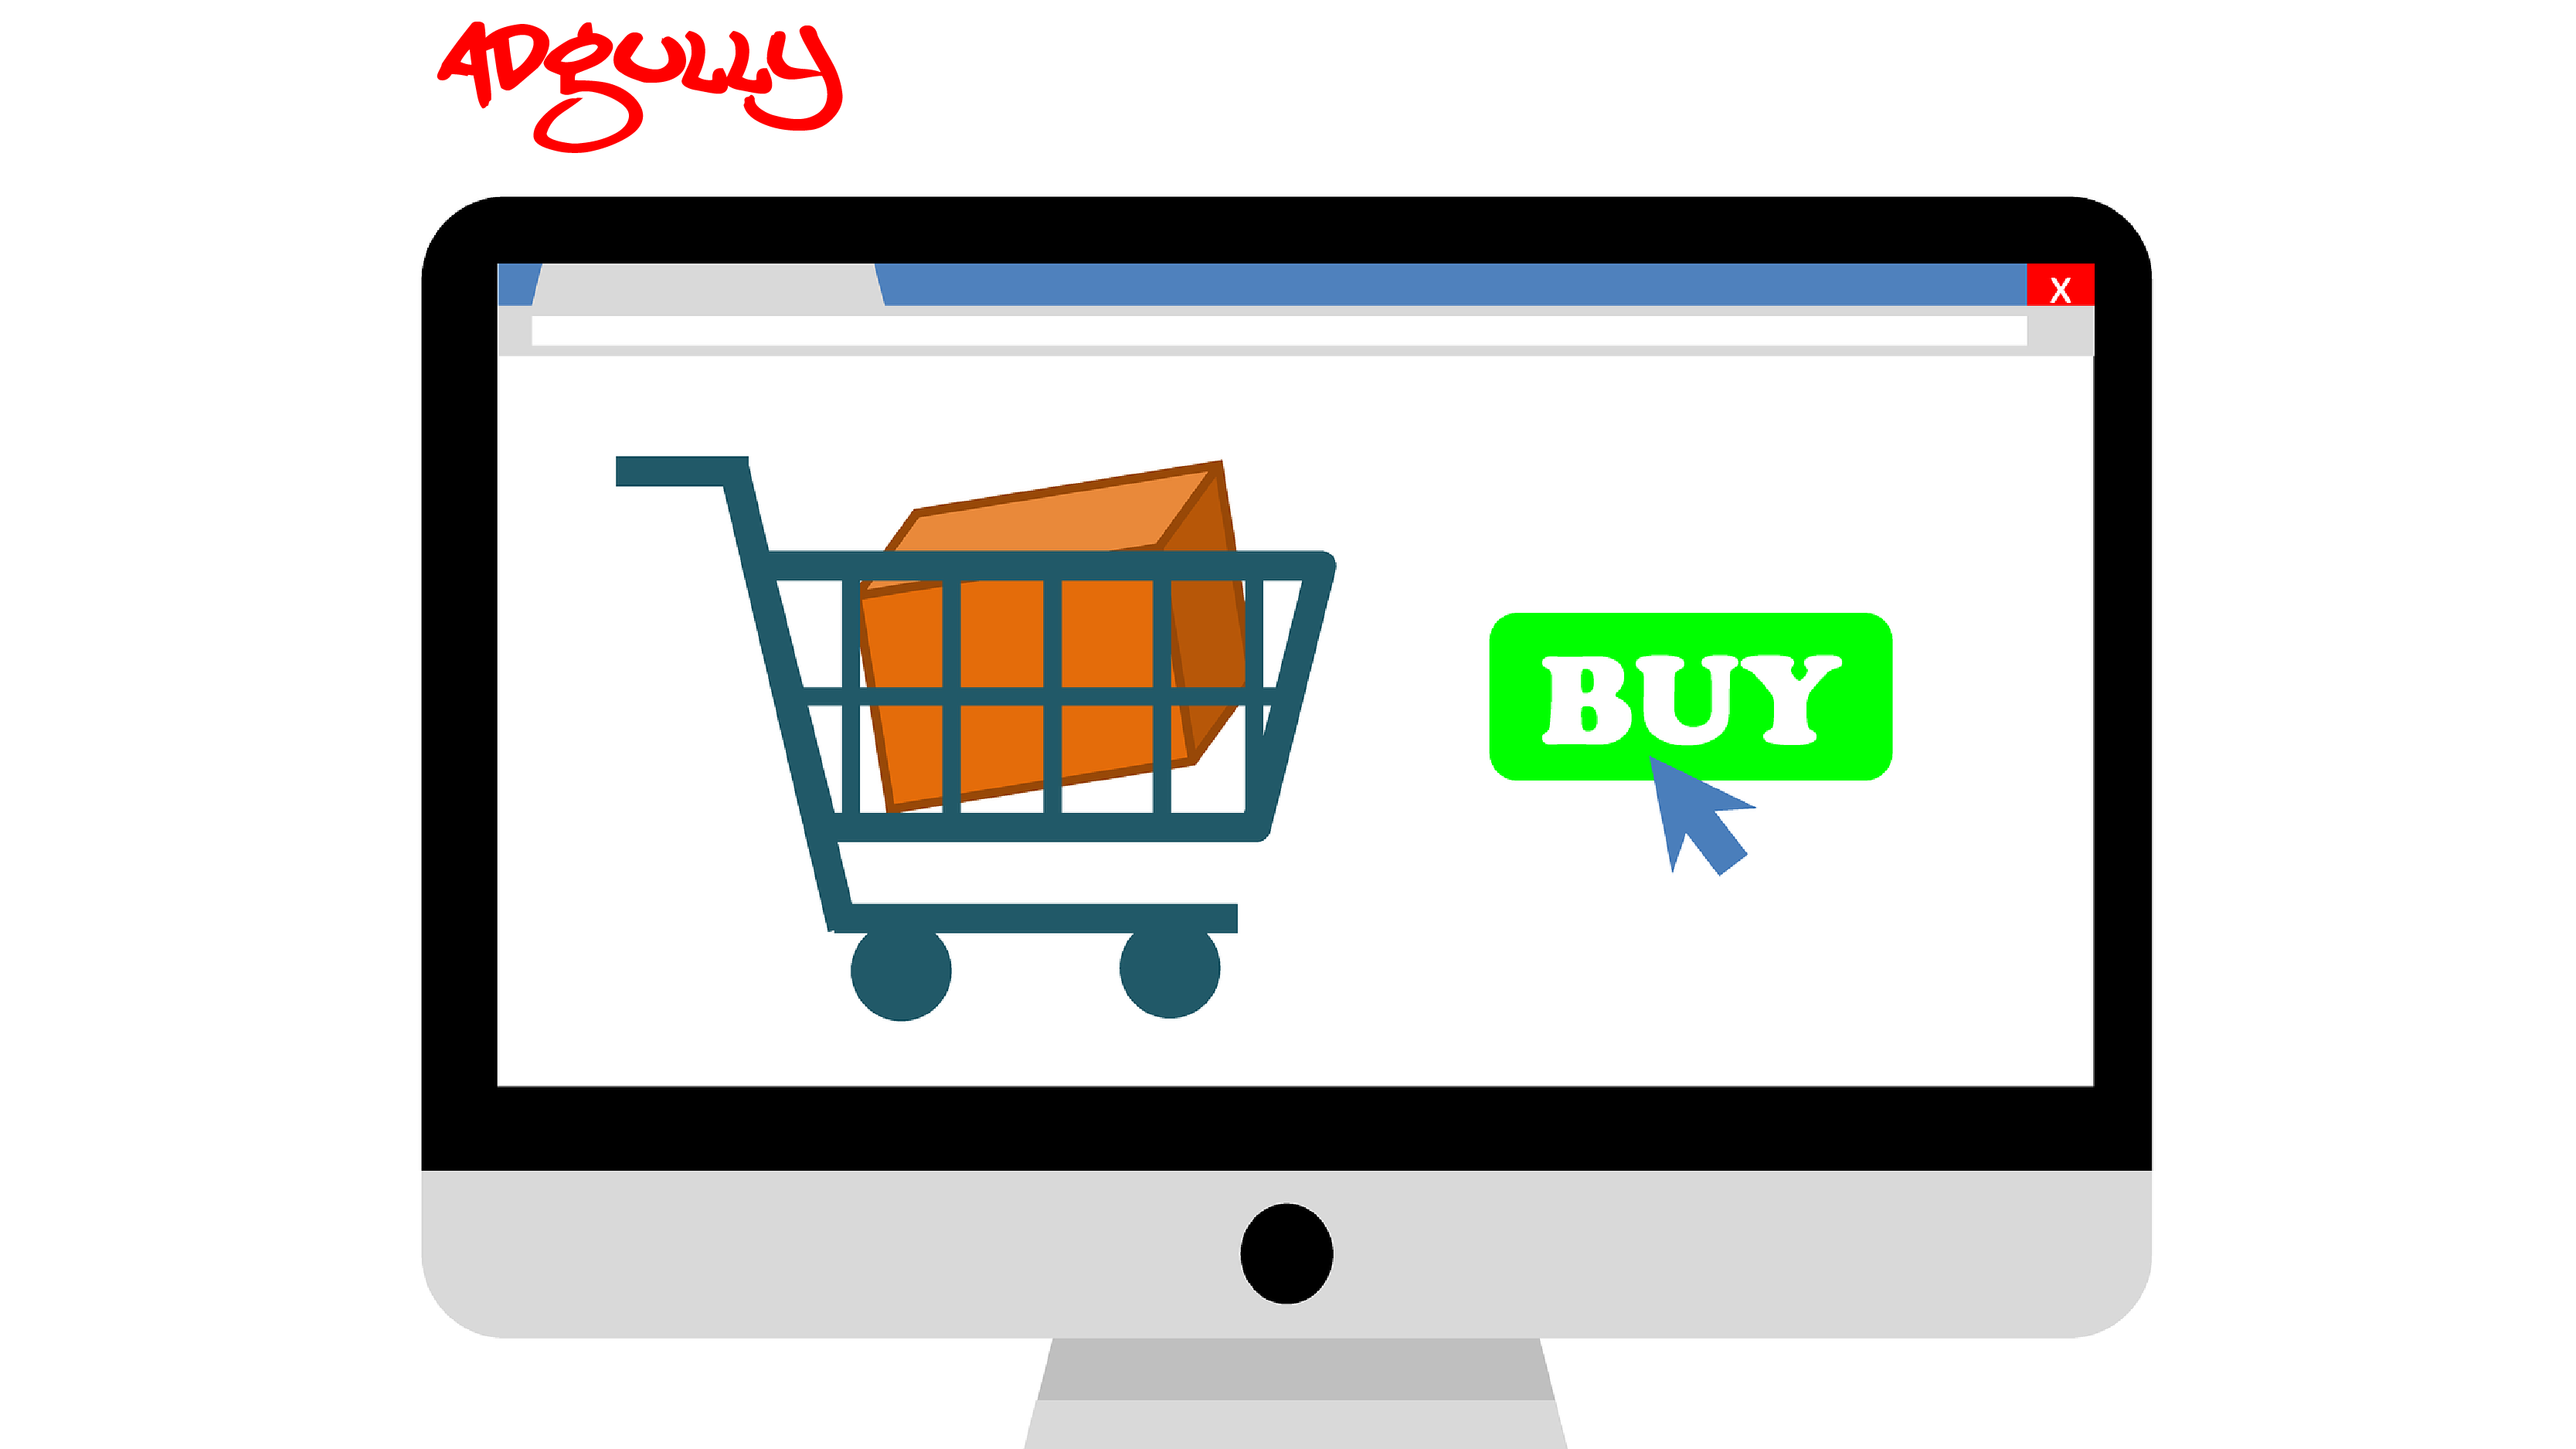 https://adgully.me/post/5194/revolutionizing-retail-the-silent-rise-of-ai-in-e-commerce